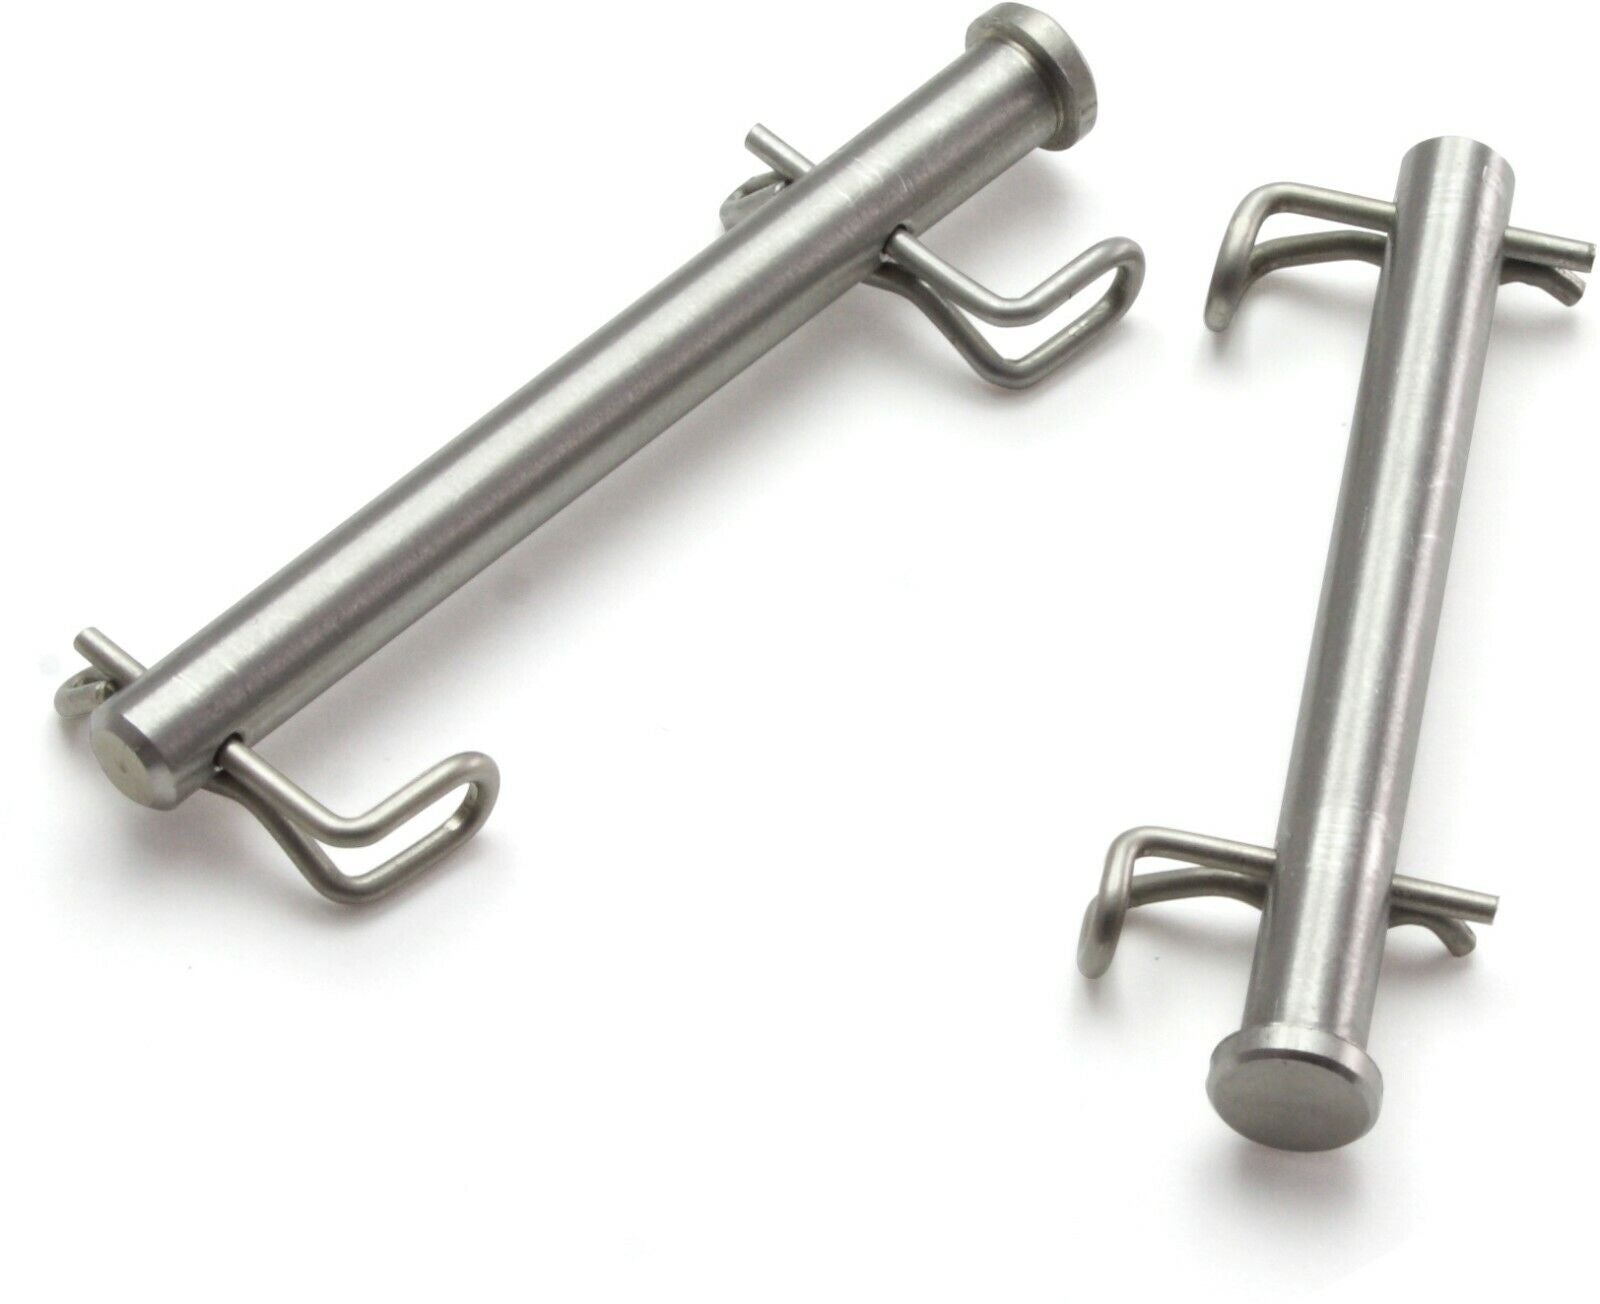 Stainless brake pin set for CR 02-07 and RM 05-08 models, 2 pieces